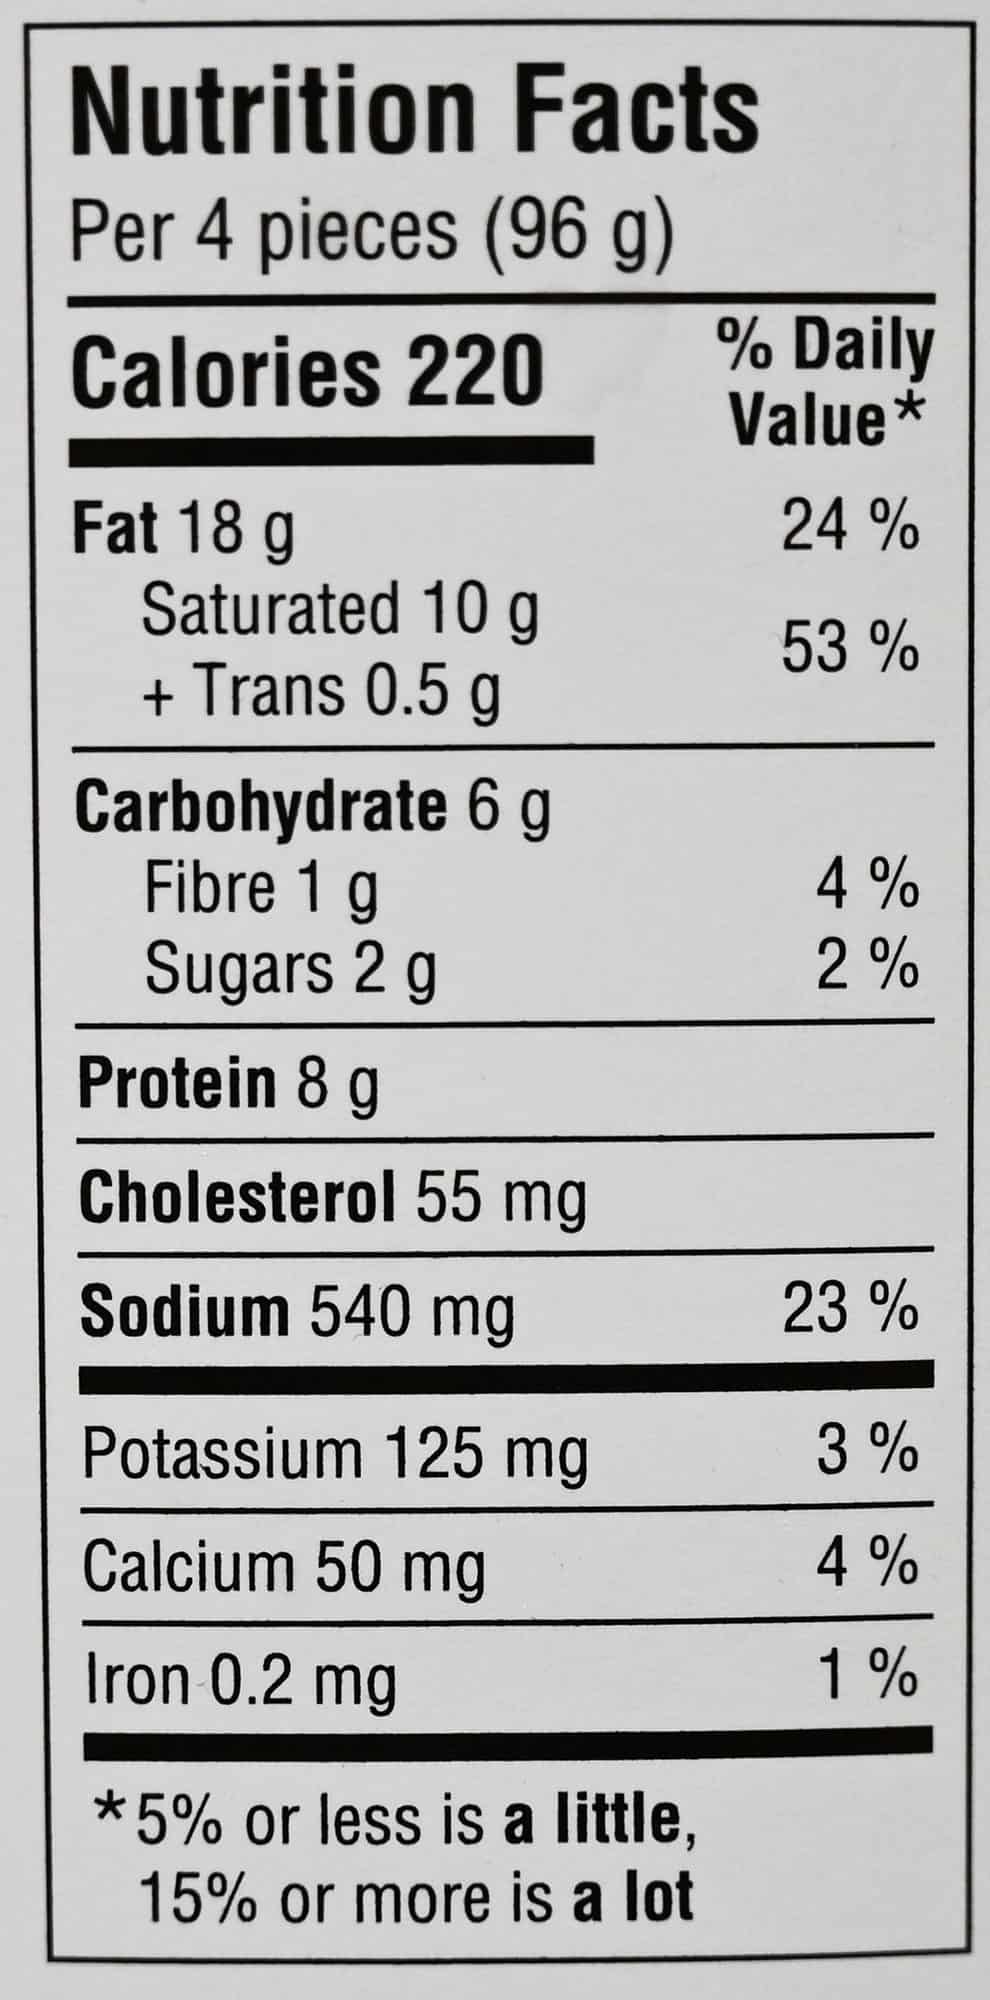 Image of the nutrition facts from the box.